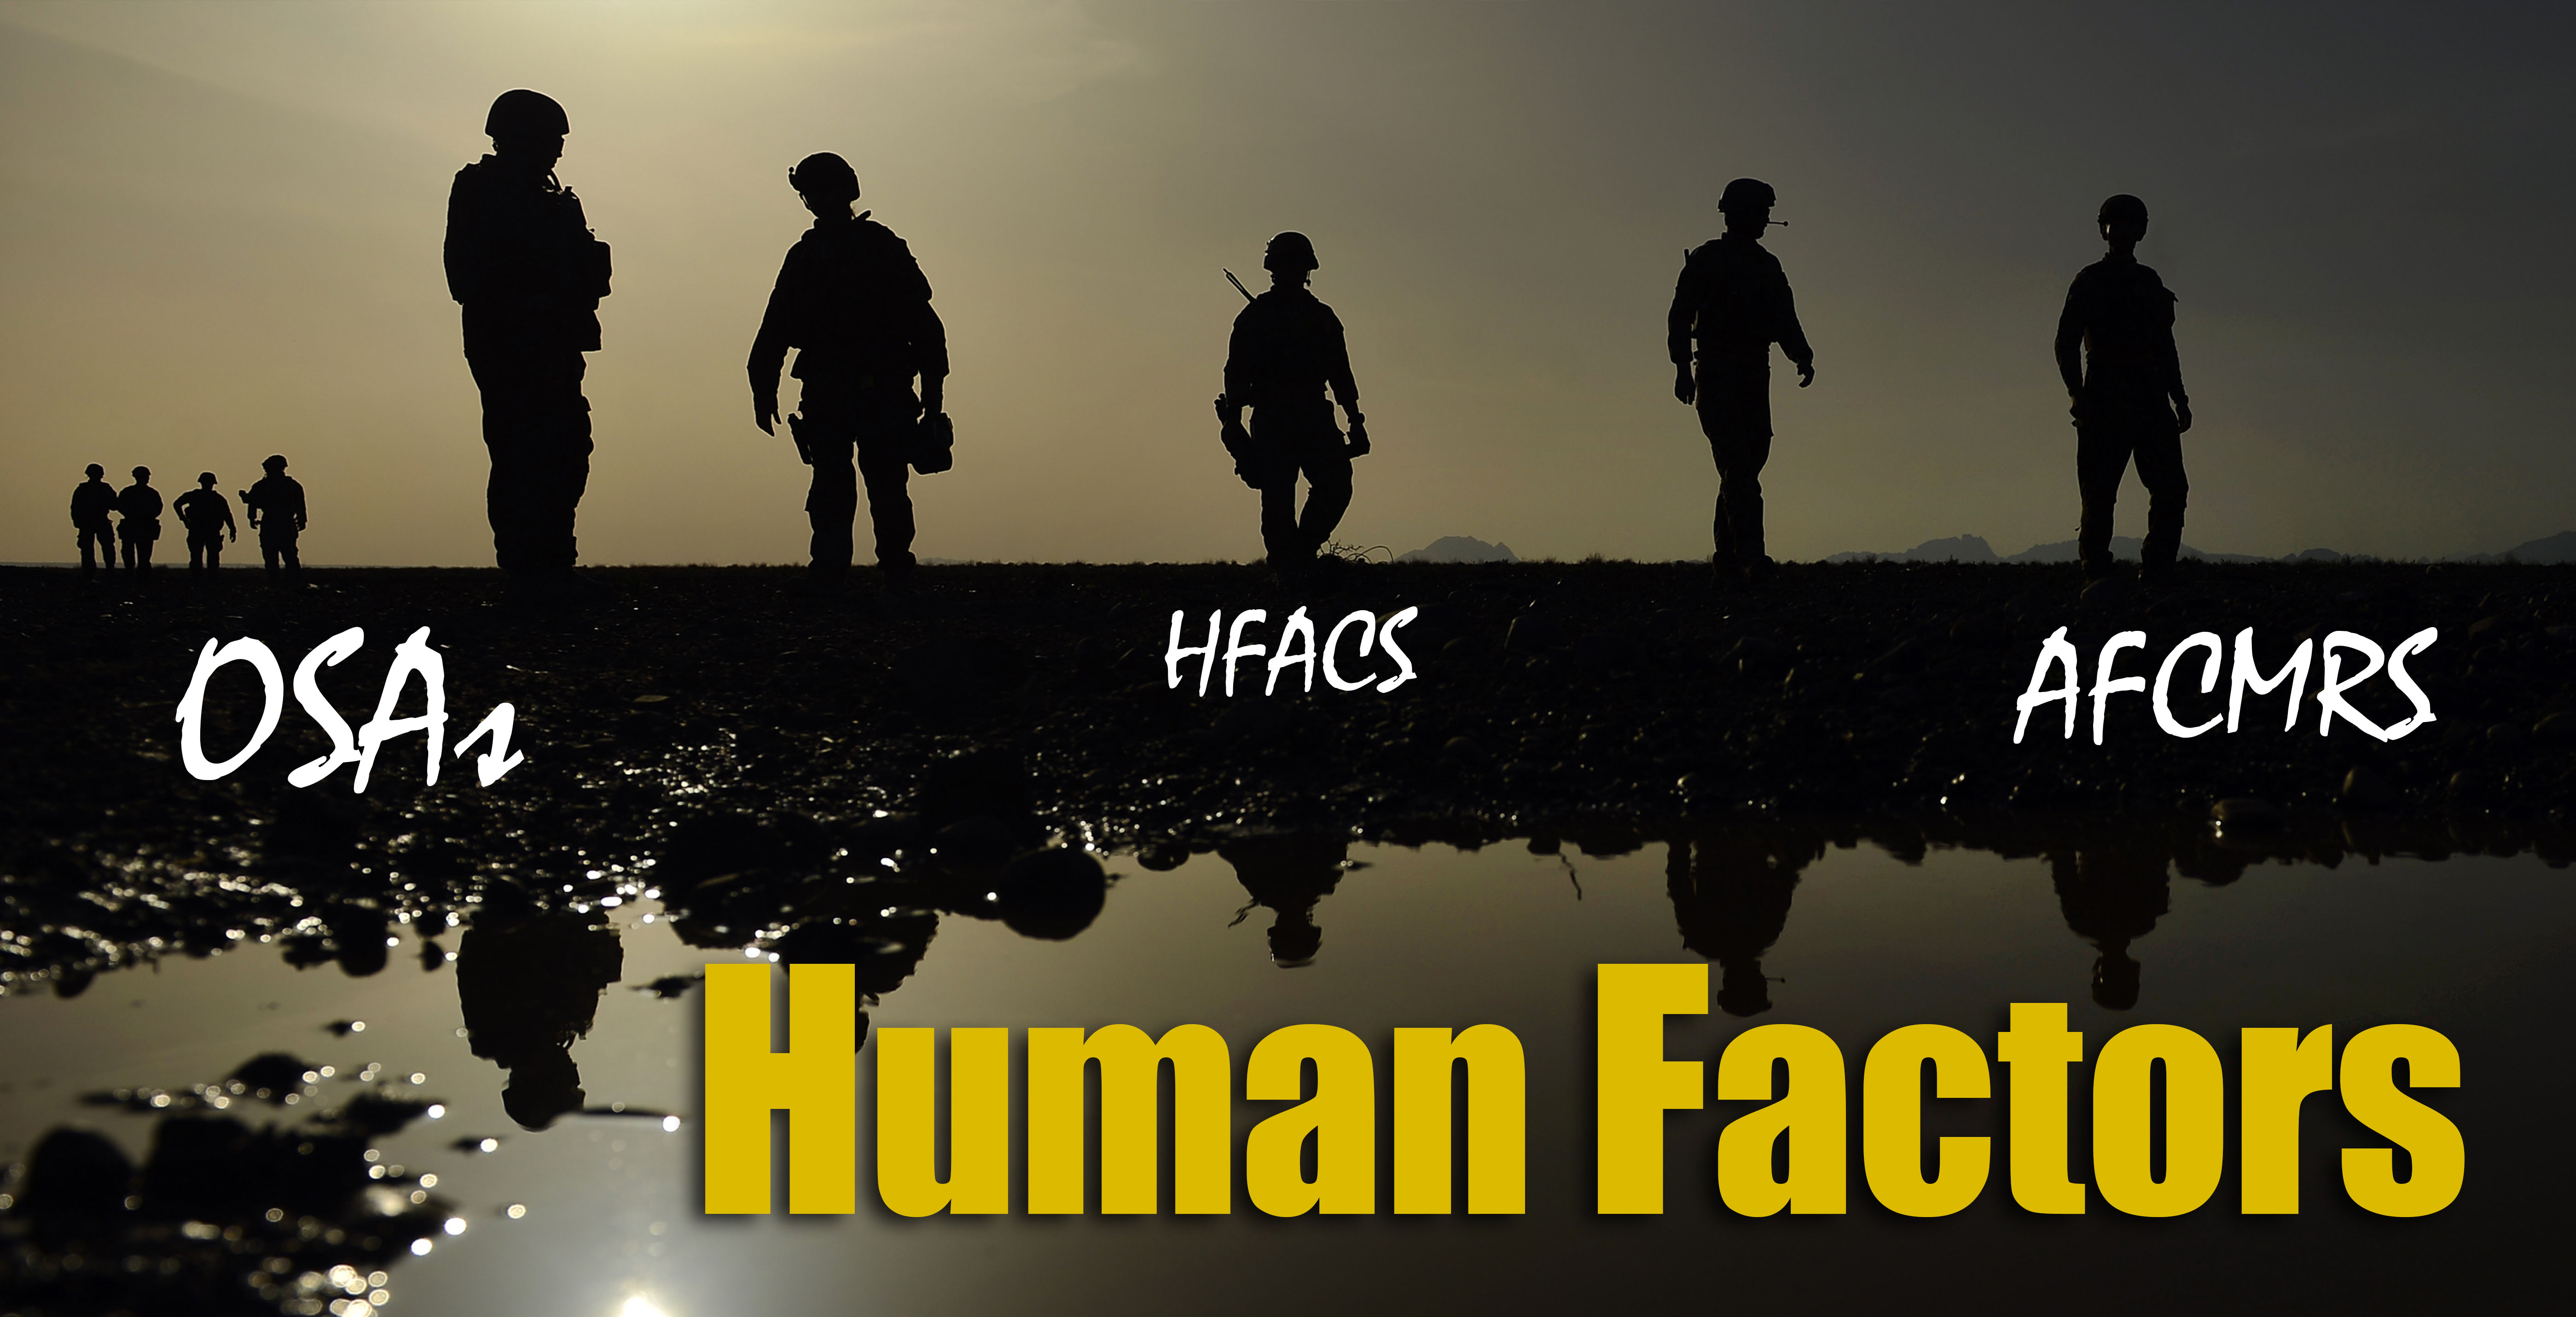 Human Factors Banner - A silhouette of Airmen standing at the edge of a body of water